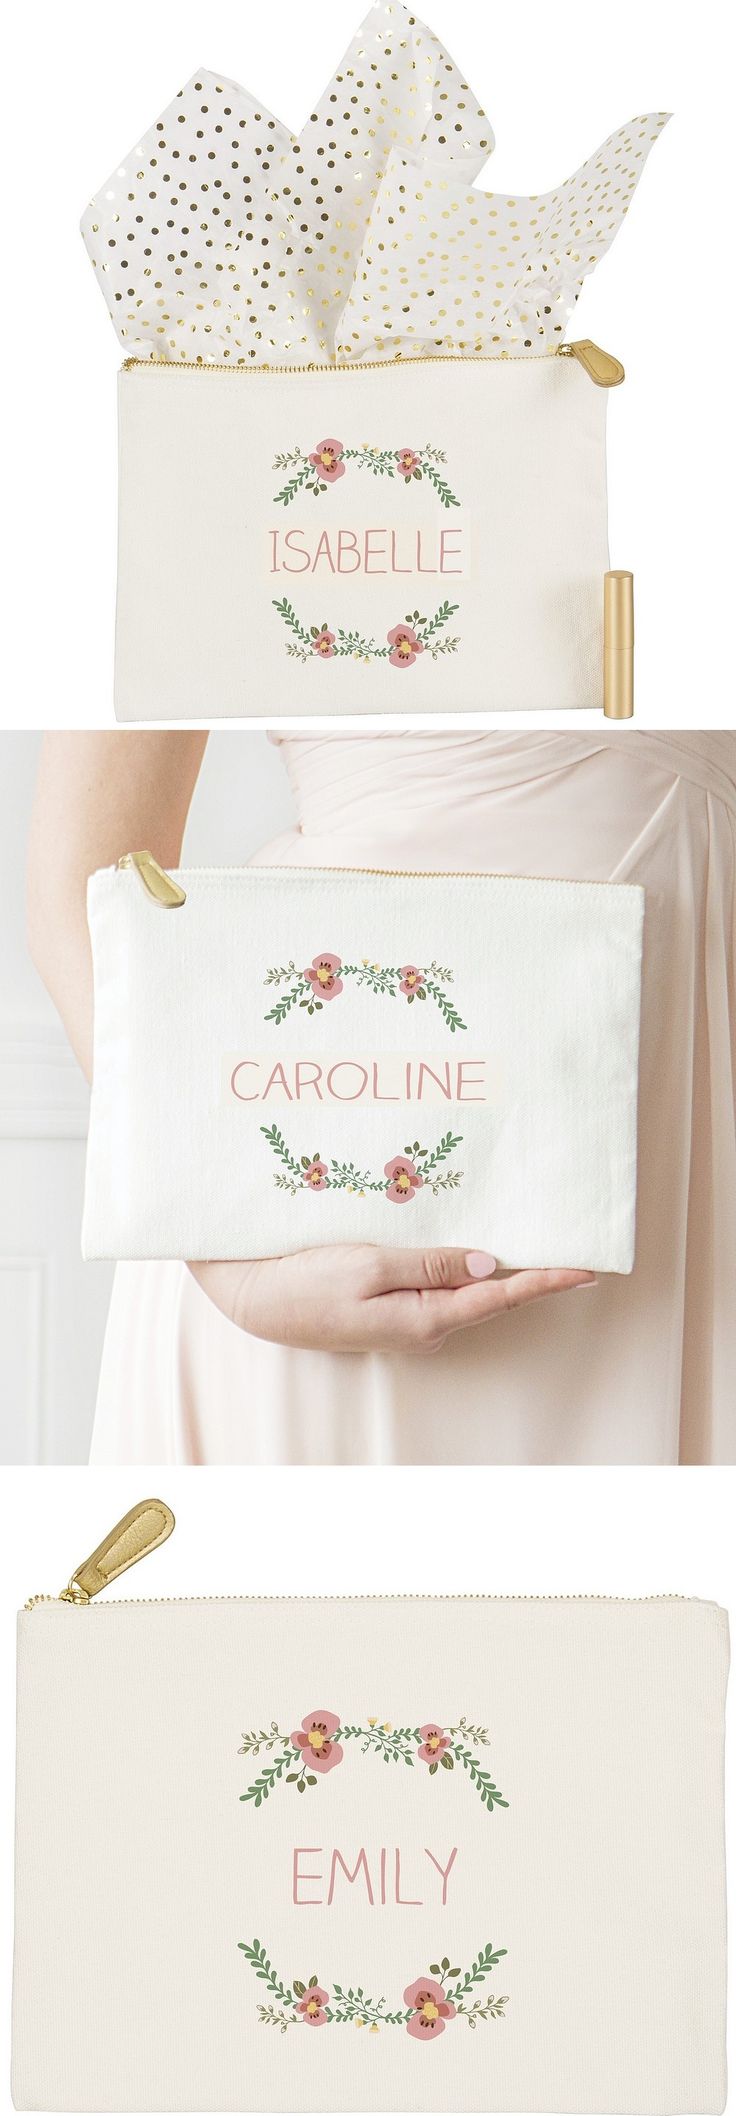 Bridal Party Idea - Have your bridesmaids carry floral design clutches instead o...